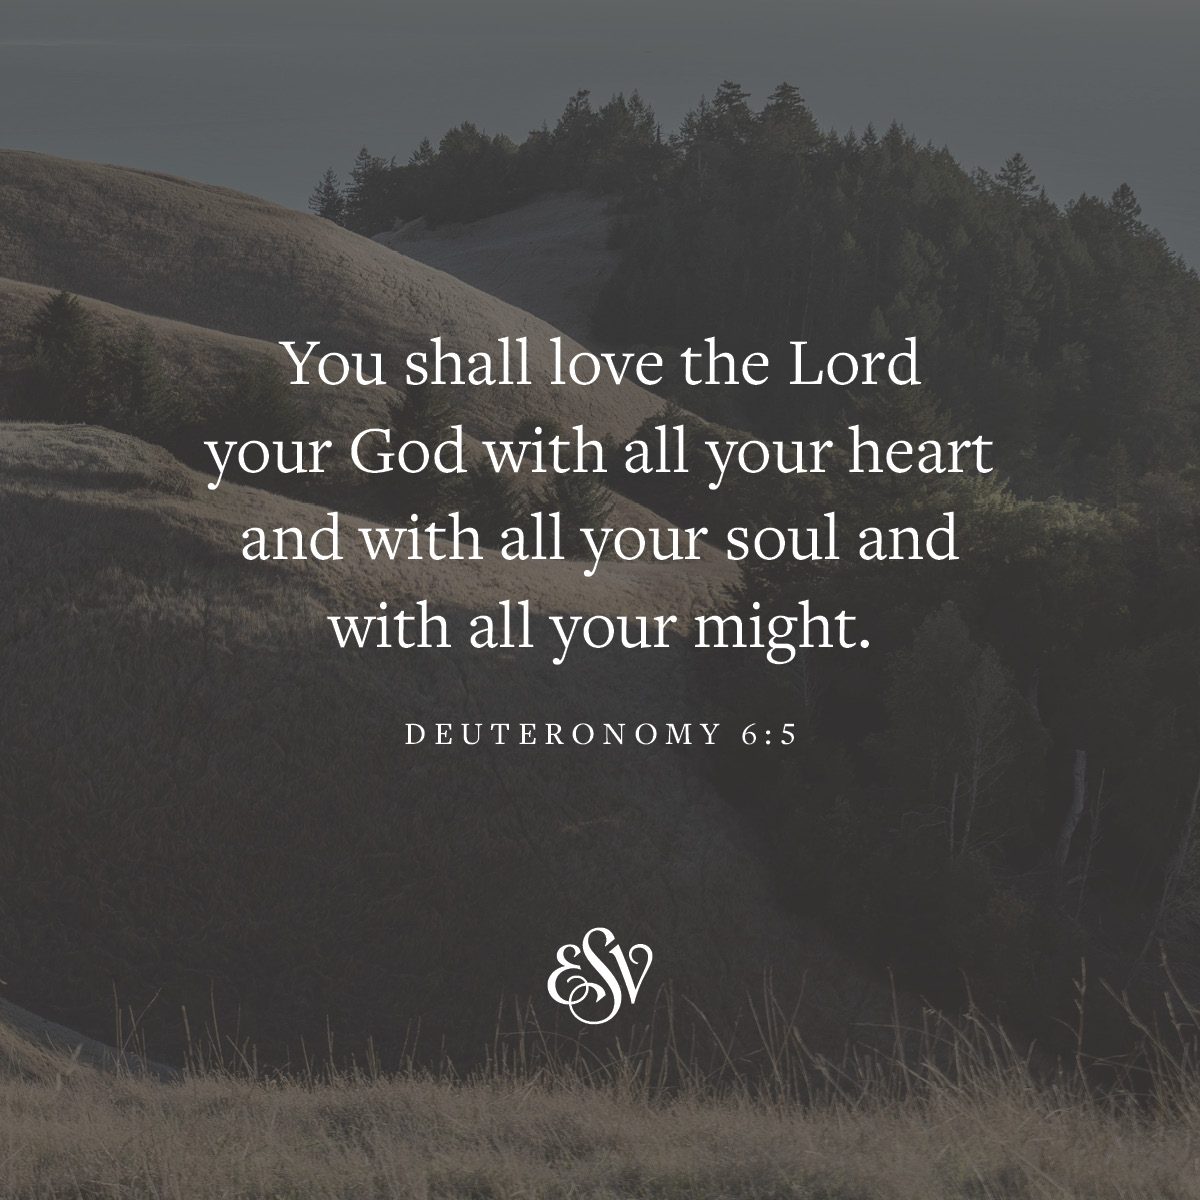 You shall love the Lord your God will all your heart and with all your soul and with all your might. 
—Deuteronomy 6:5 ESV.org

#Verseoftheday #Bible #Scripturememoryverse #ESV